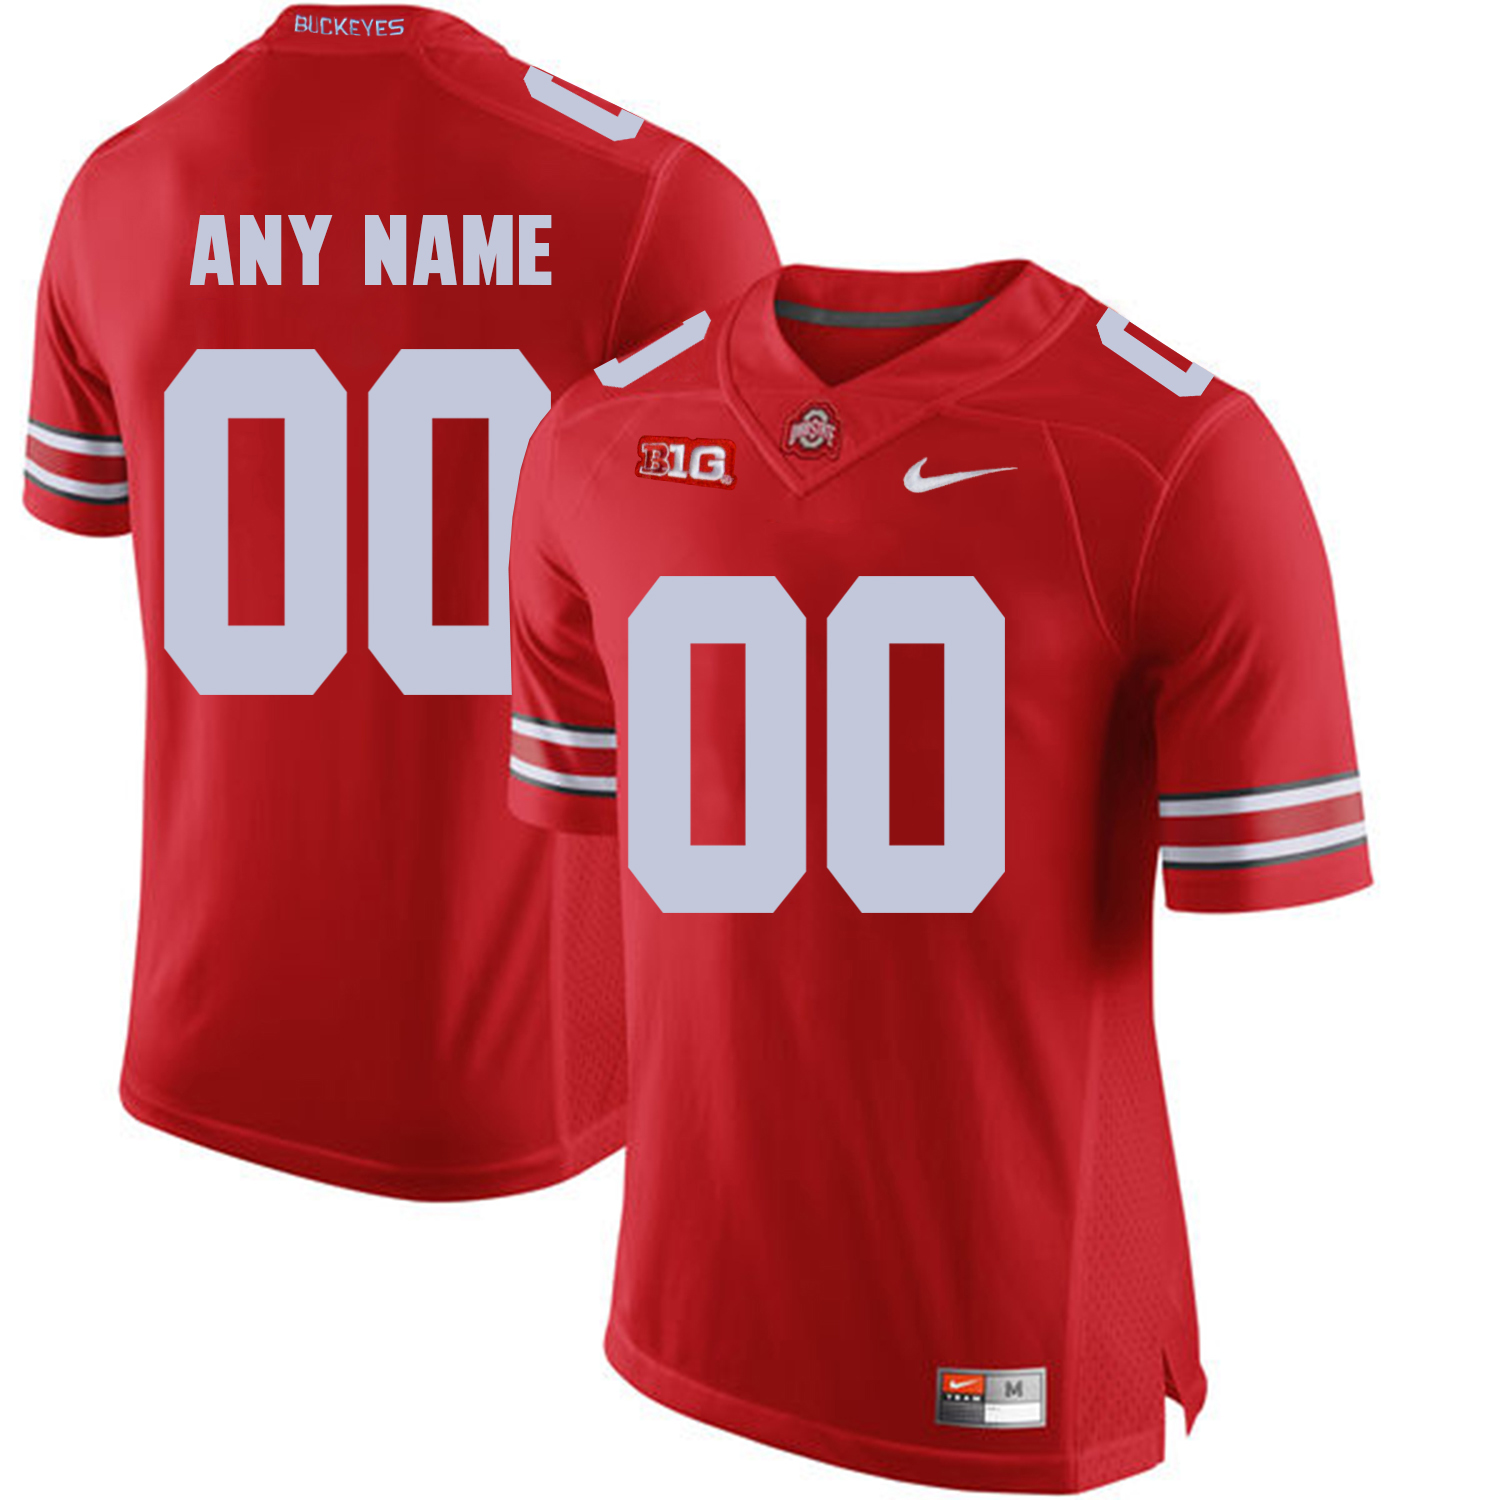 Ohio State Buckeyes Red Men's Customized College Football Jersey